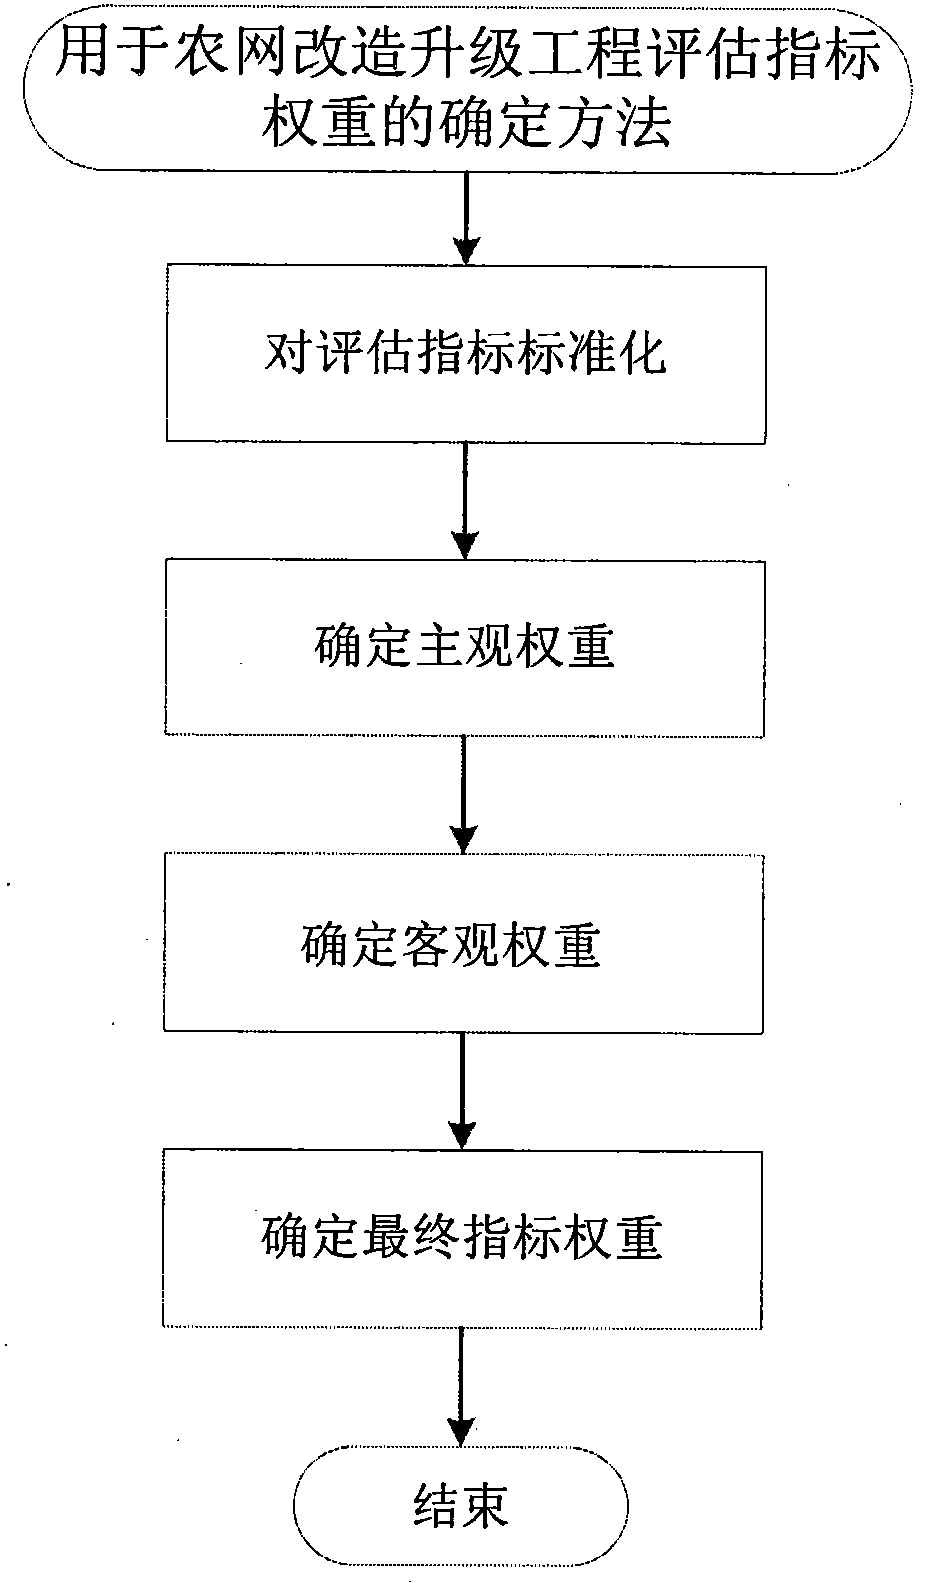 Method for determining the weight of evaluation indicators for rural power grid upgrading projects